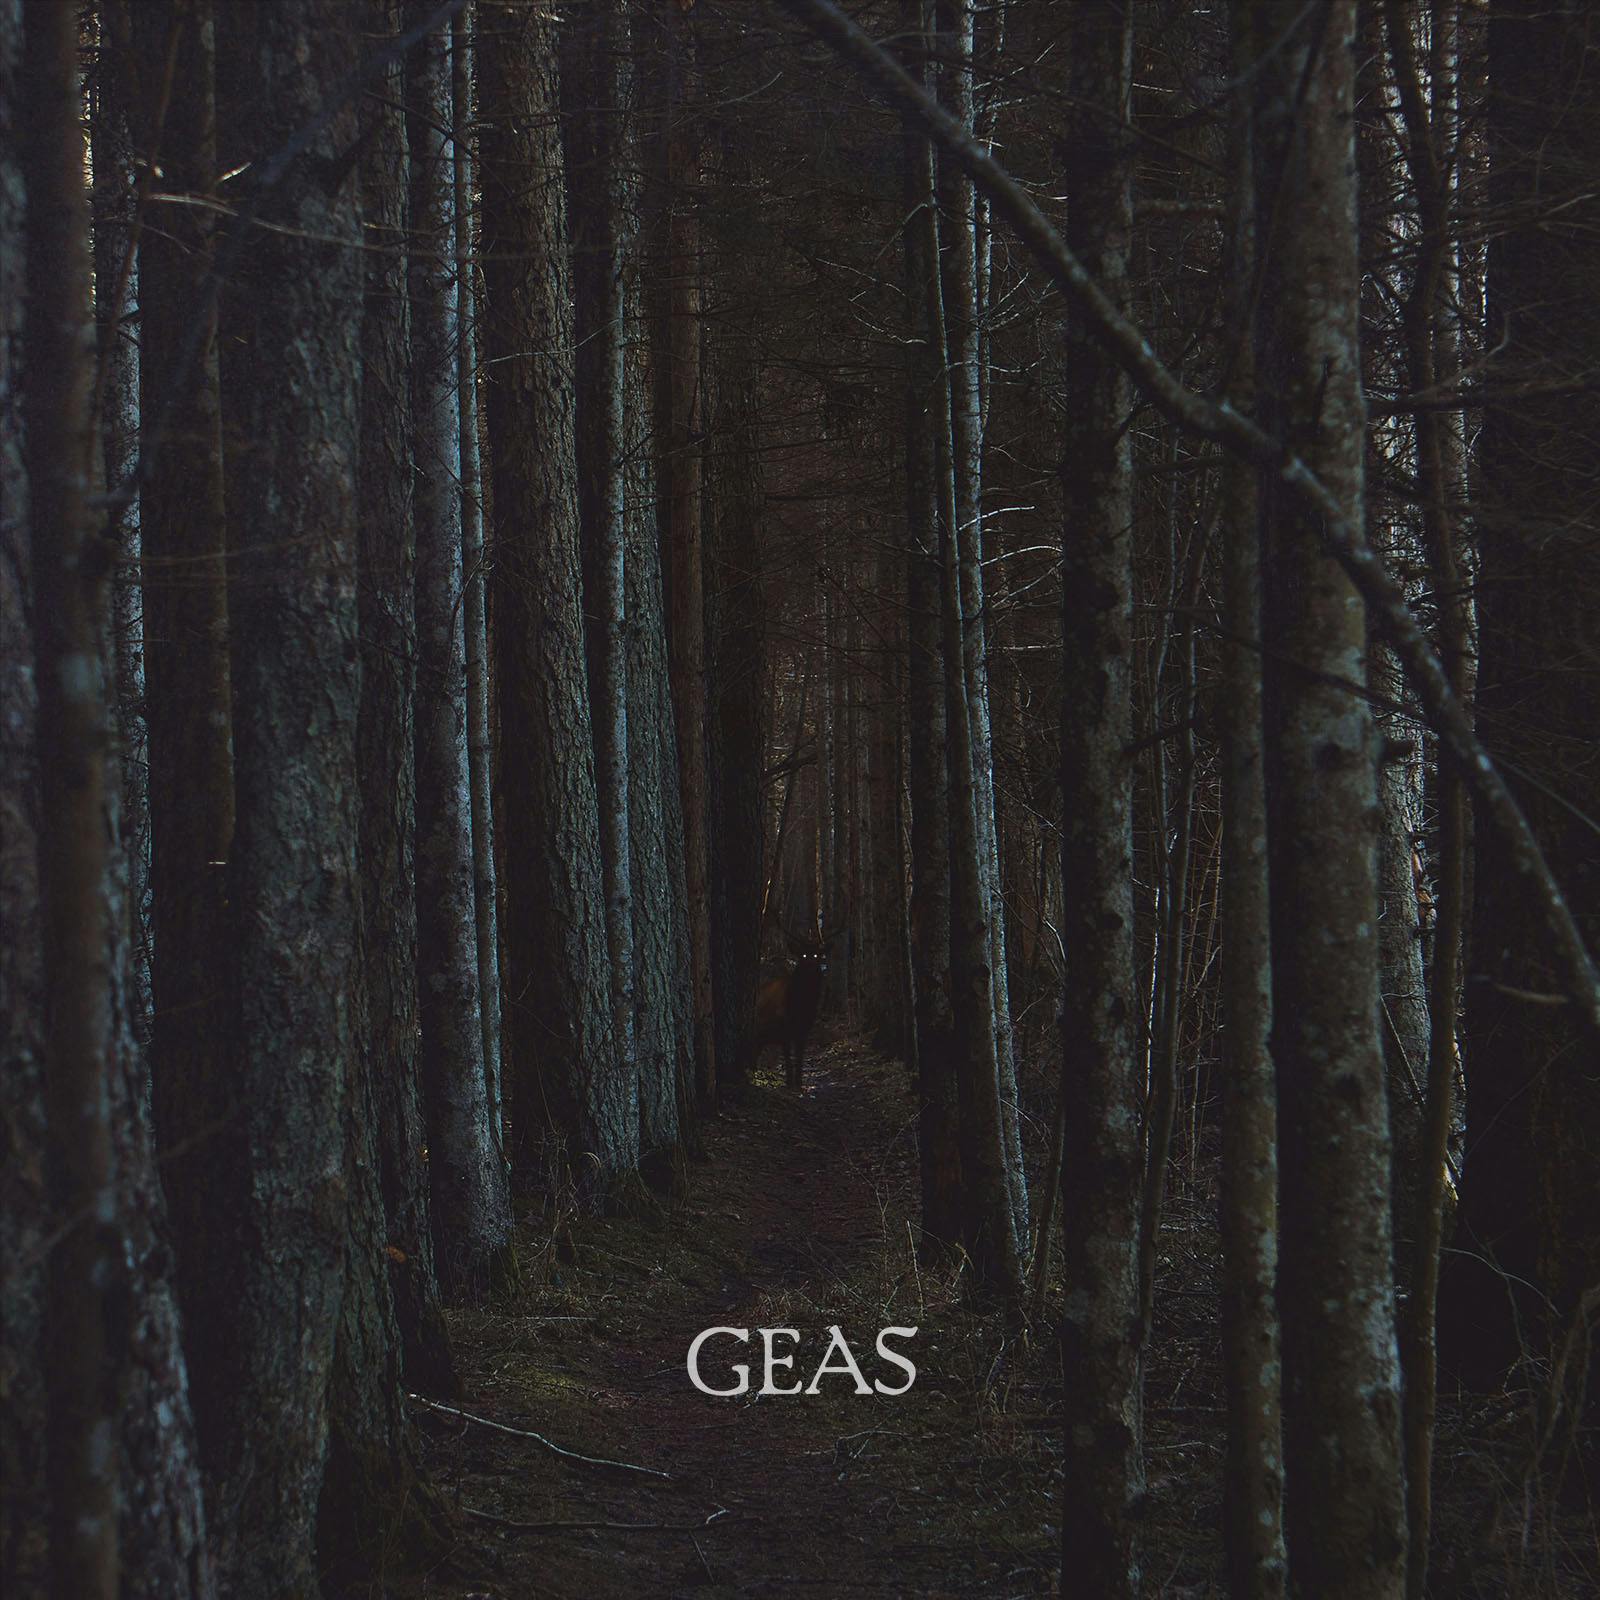 The album art for Geas. A dim and spooky forest with a foreboding deer staring at the viewer with glowing eyes and a dark figure.